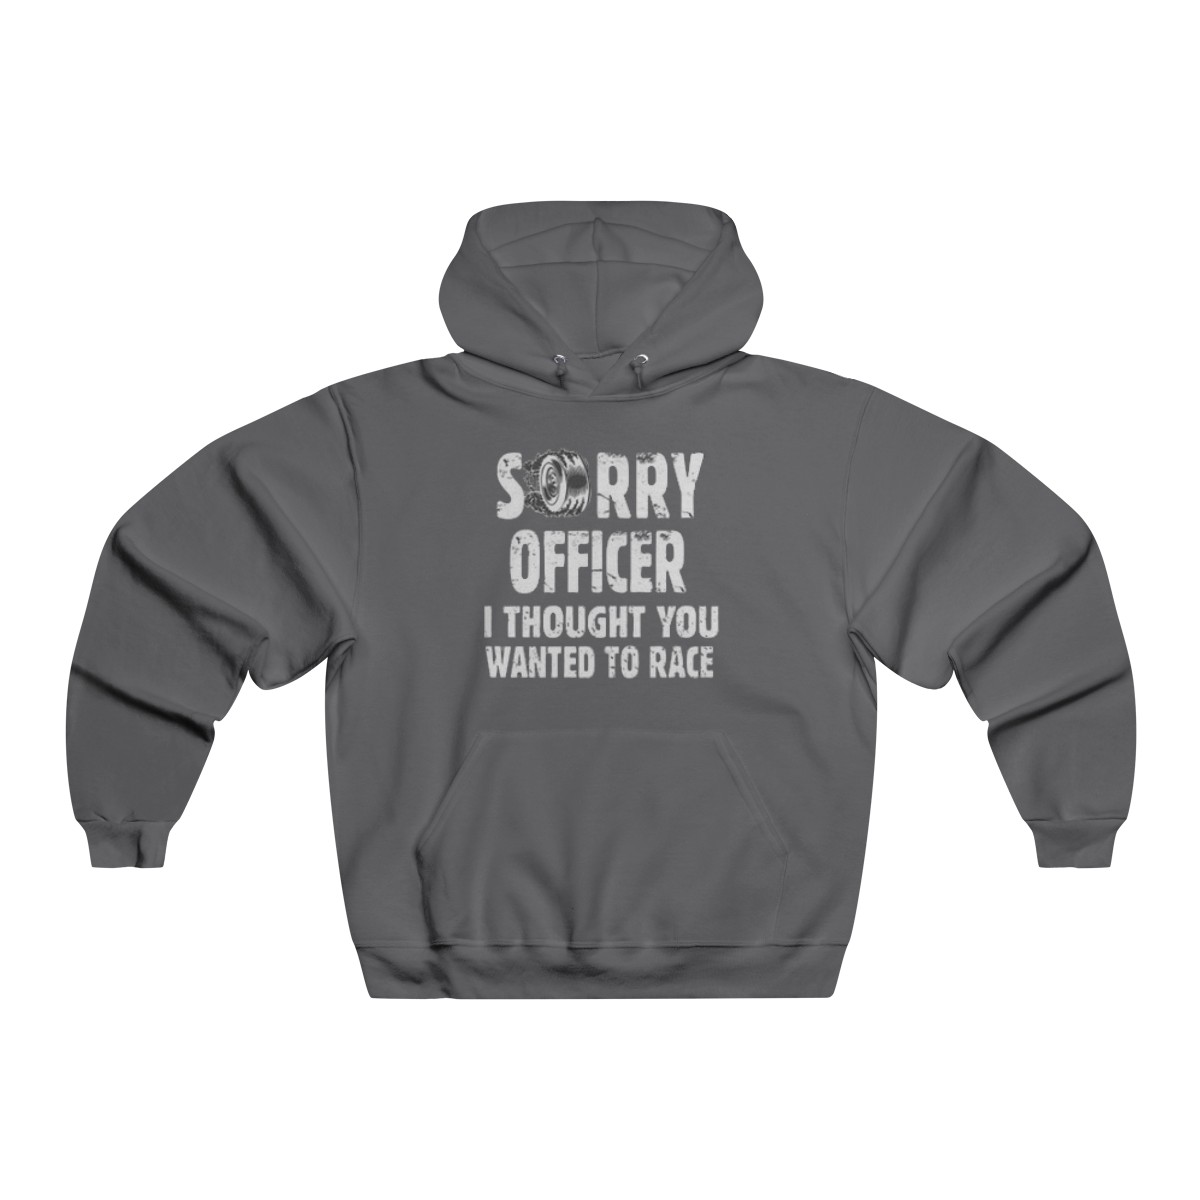 Sorry Officer, I Thought You Wanted to Race Hooded Sweatshirt product thumbnail image